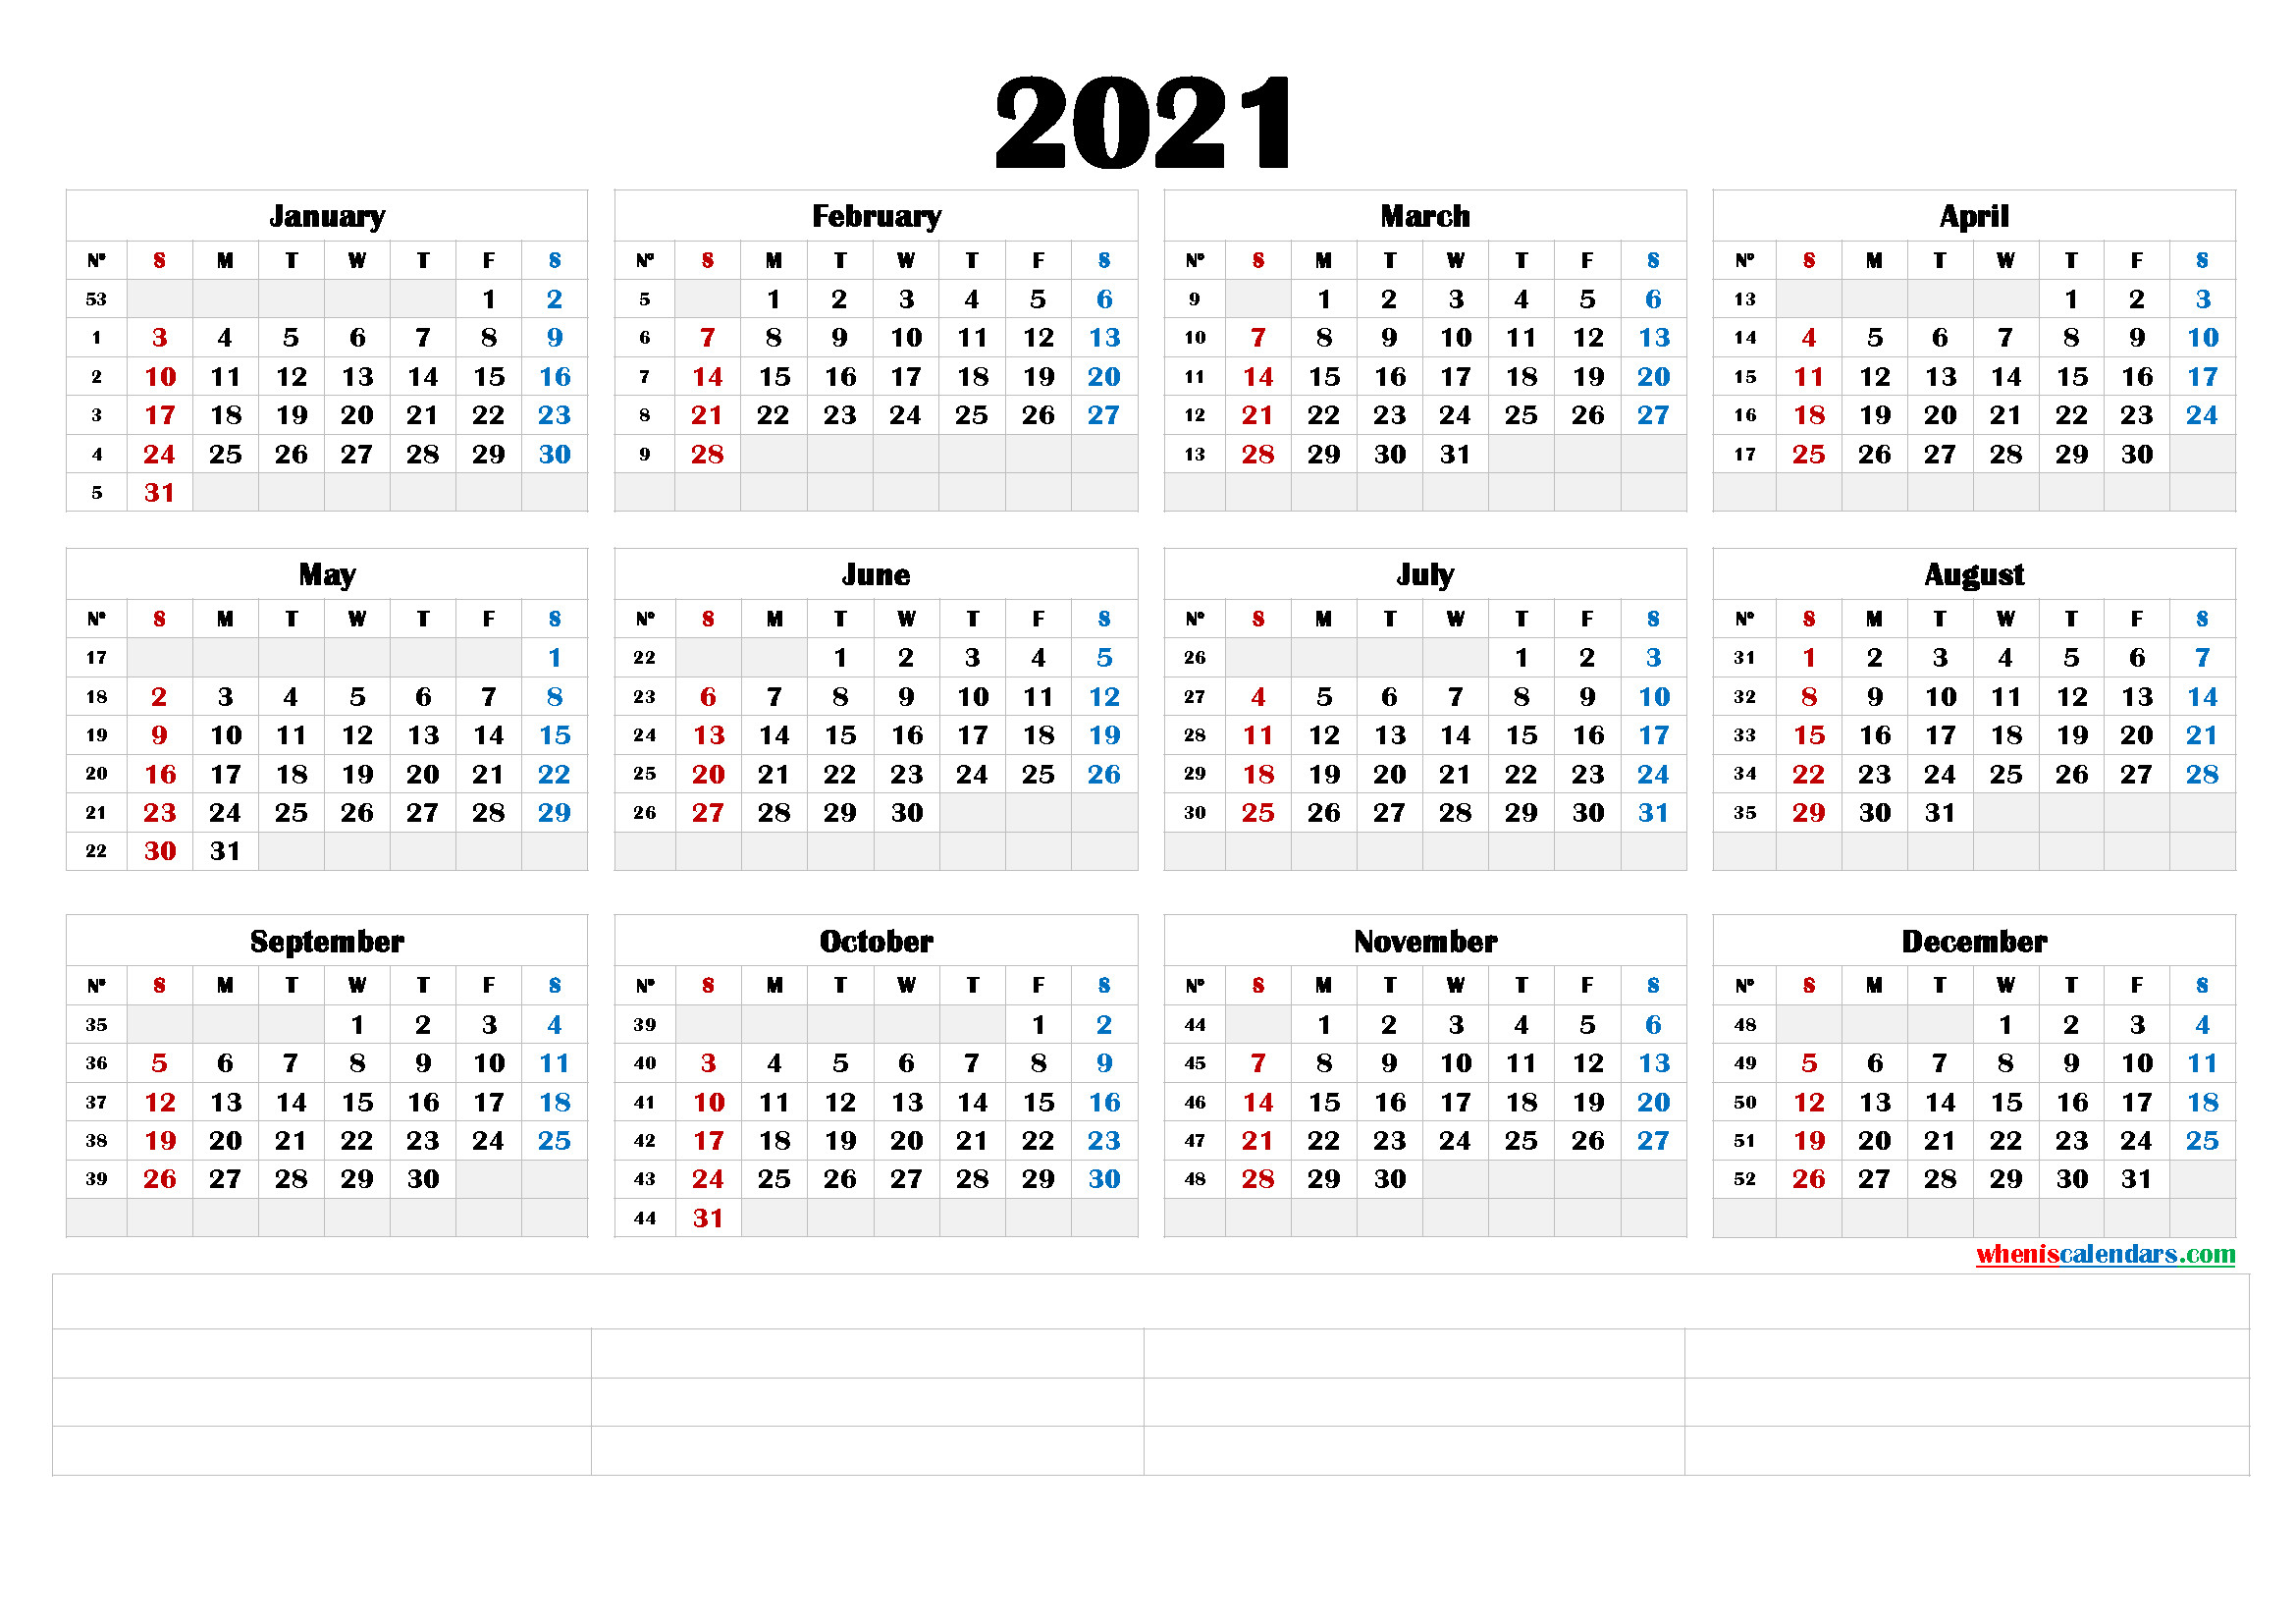 Free 2021 Yearly Calender Template - Free Printable-Printable Calendar 2021 Monthly That Can Be Edited